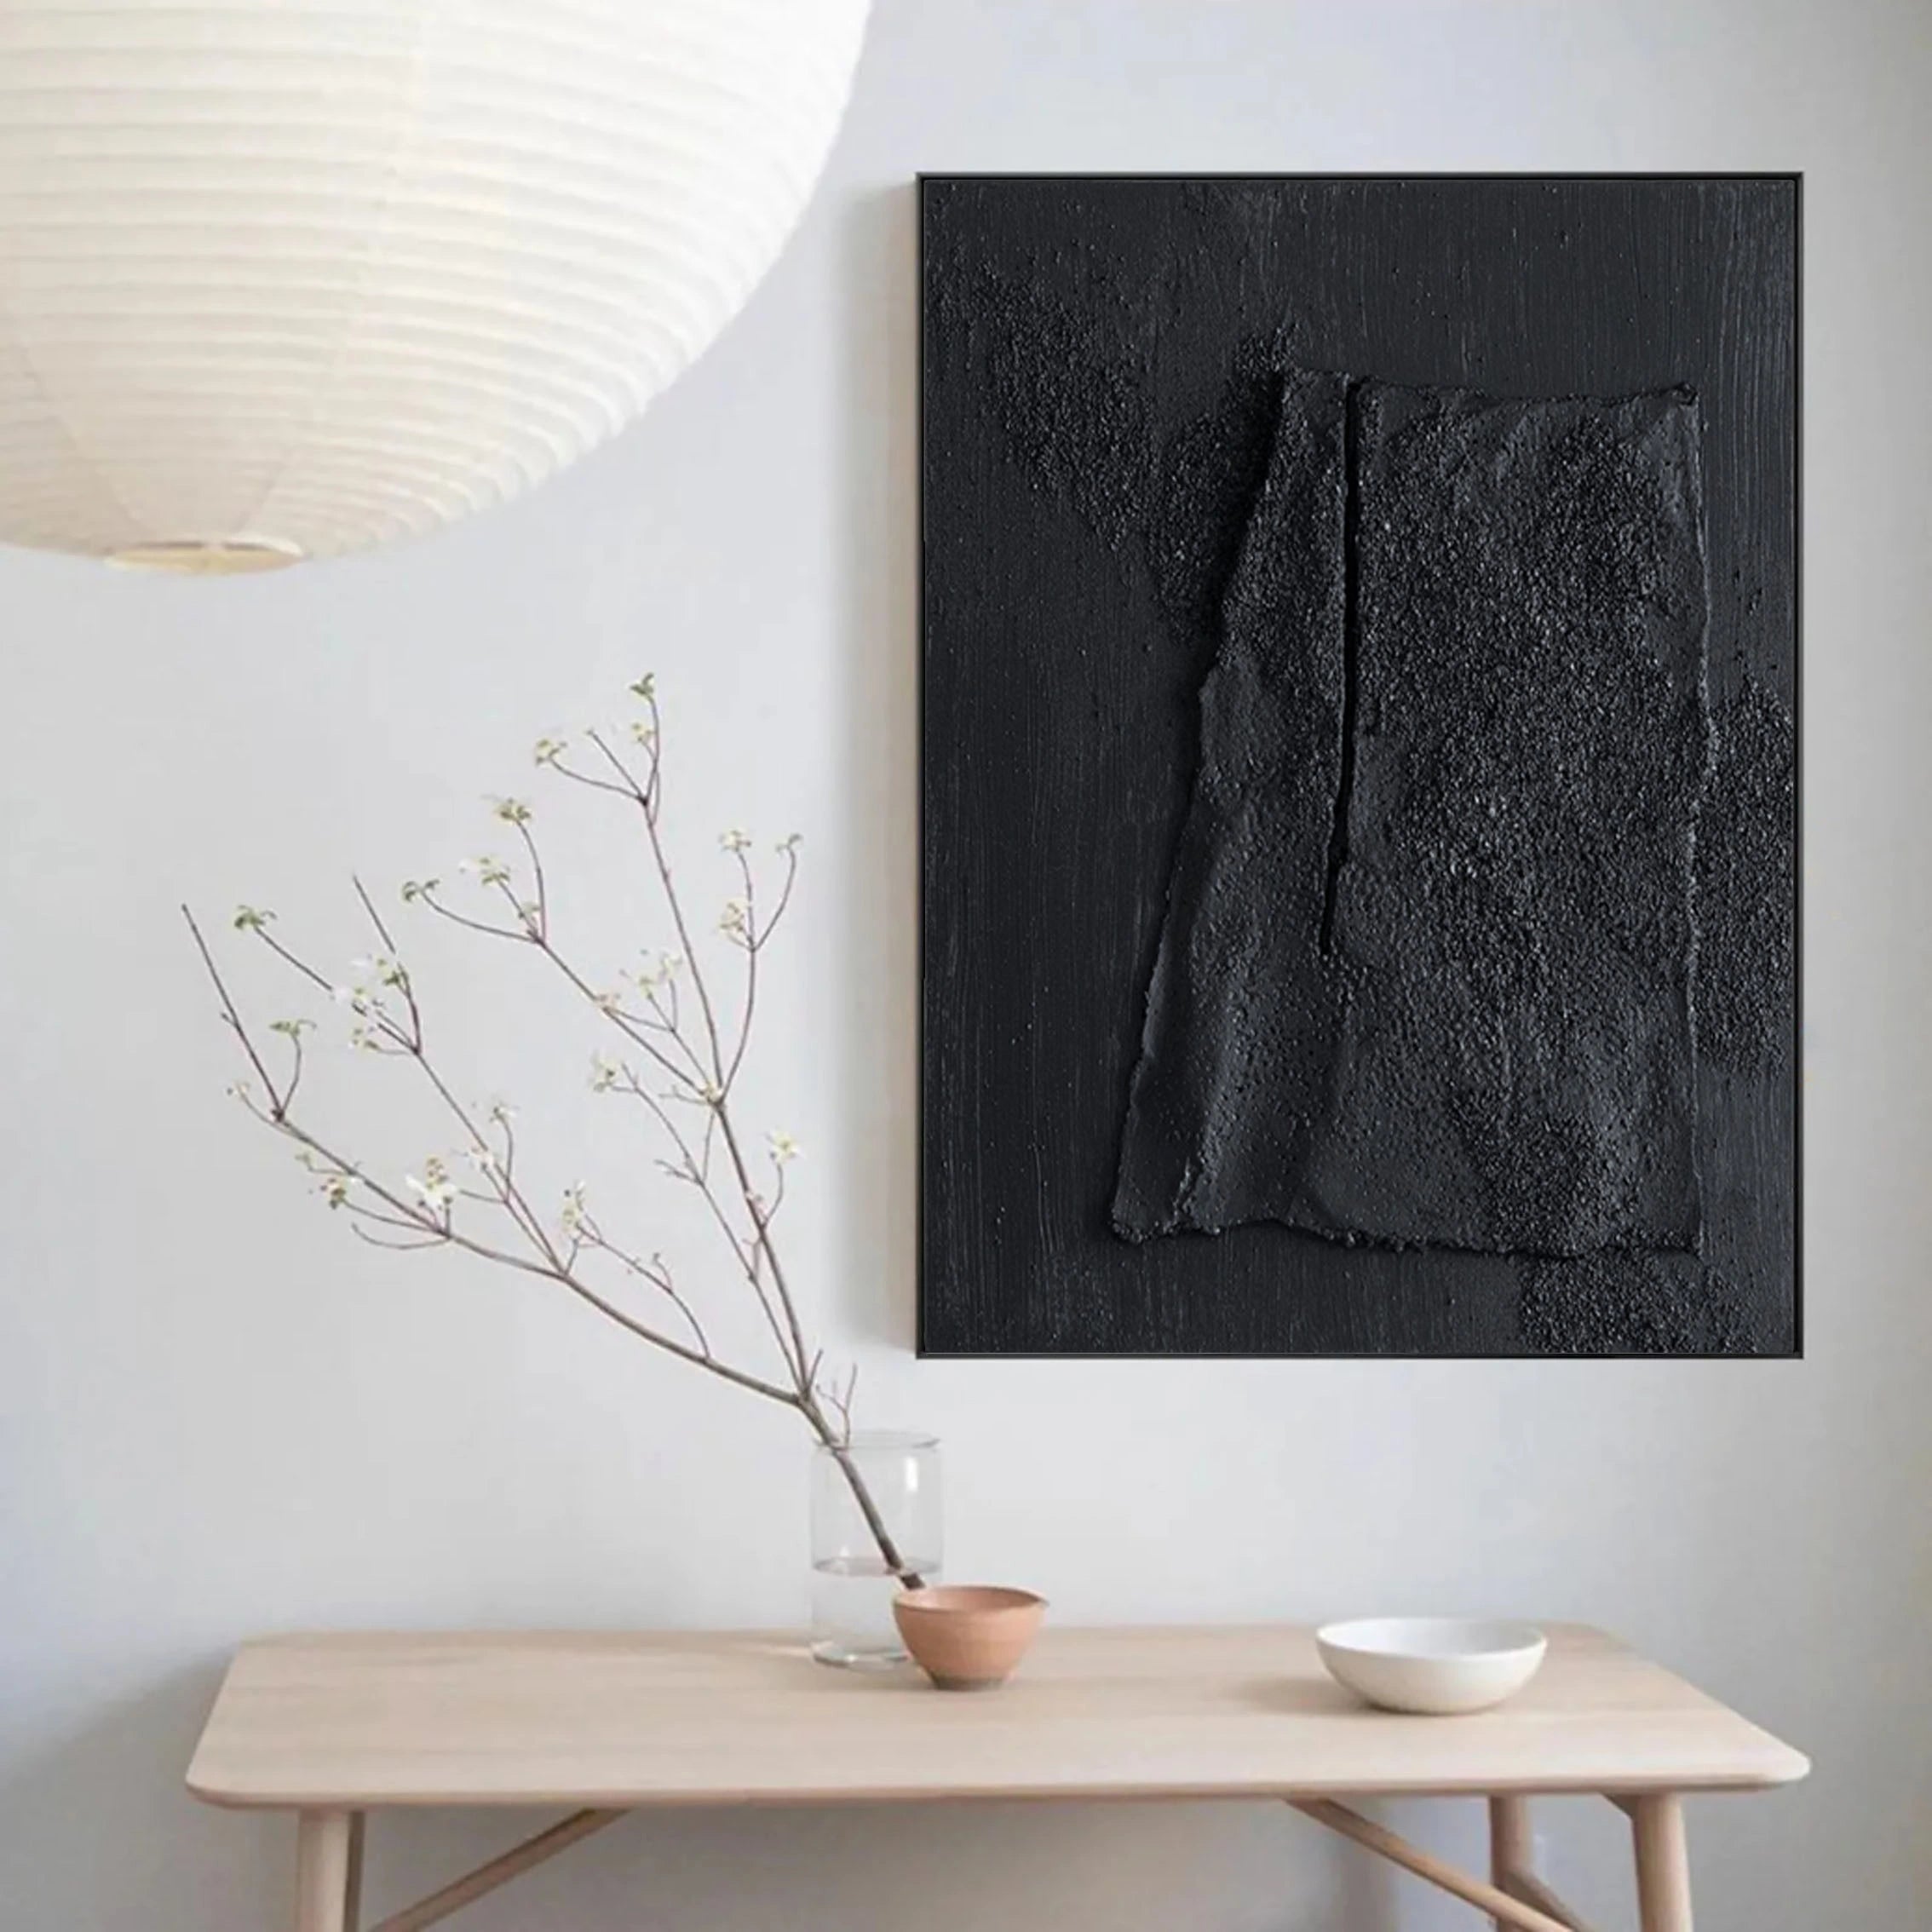 Black Textured Minimalist Painting on Canvas Handcrafted by Artist